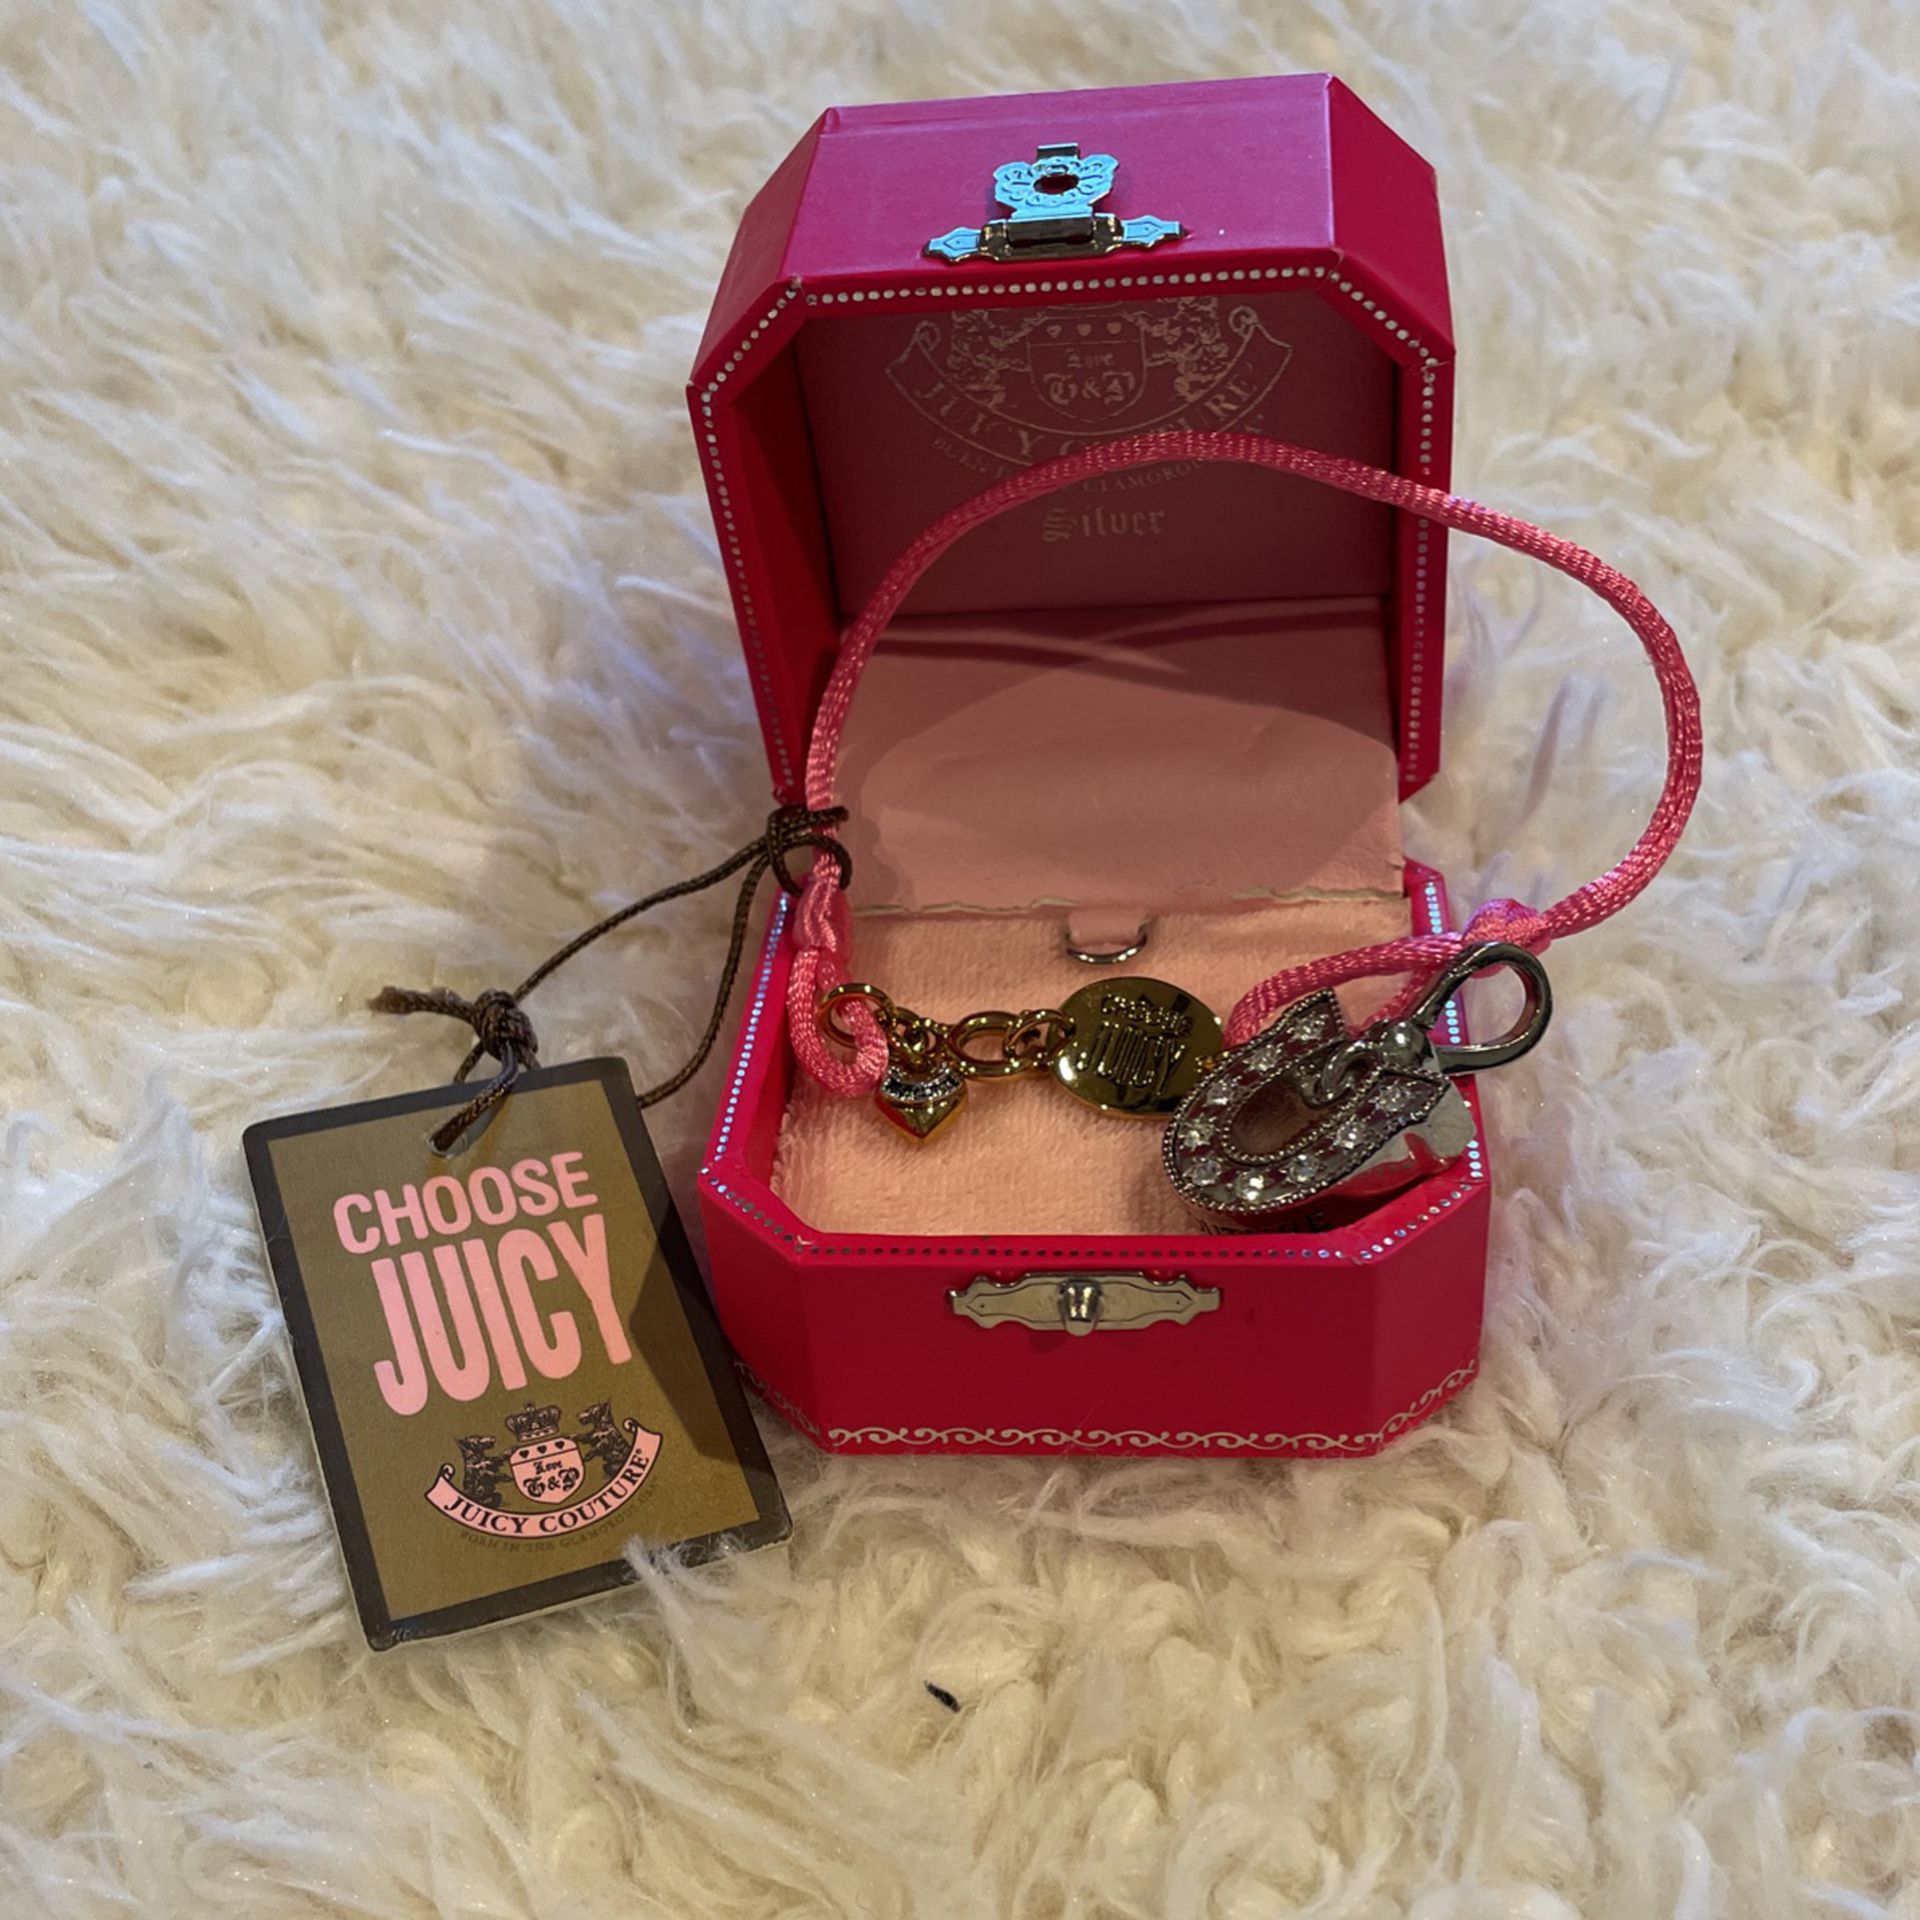 Juicy Couture Bracelet With Charm for Sale in Las Vegas, NV - OfferUp